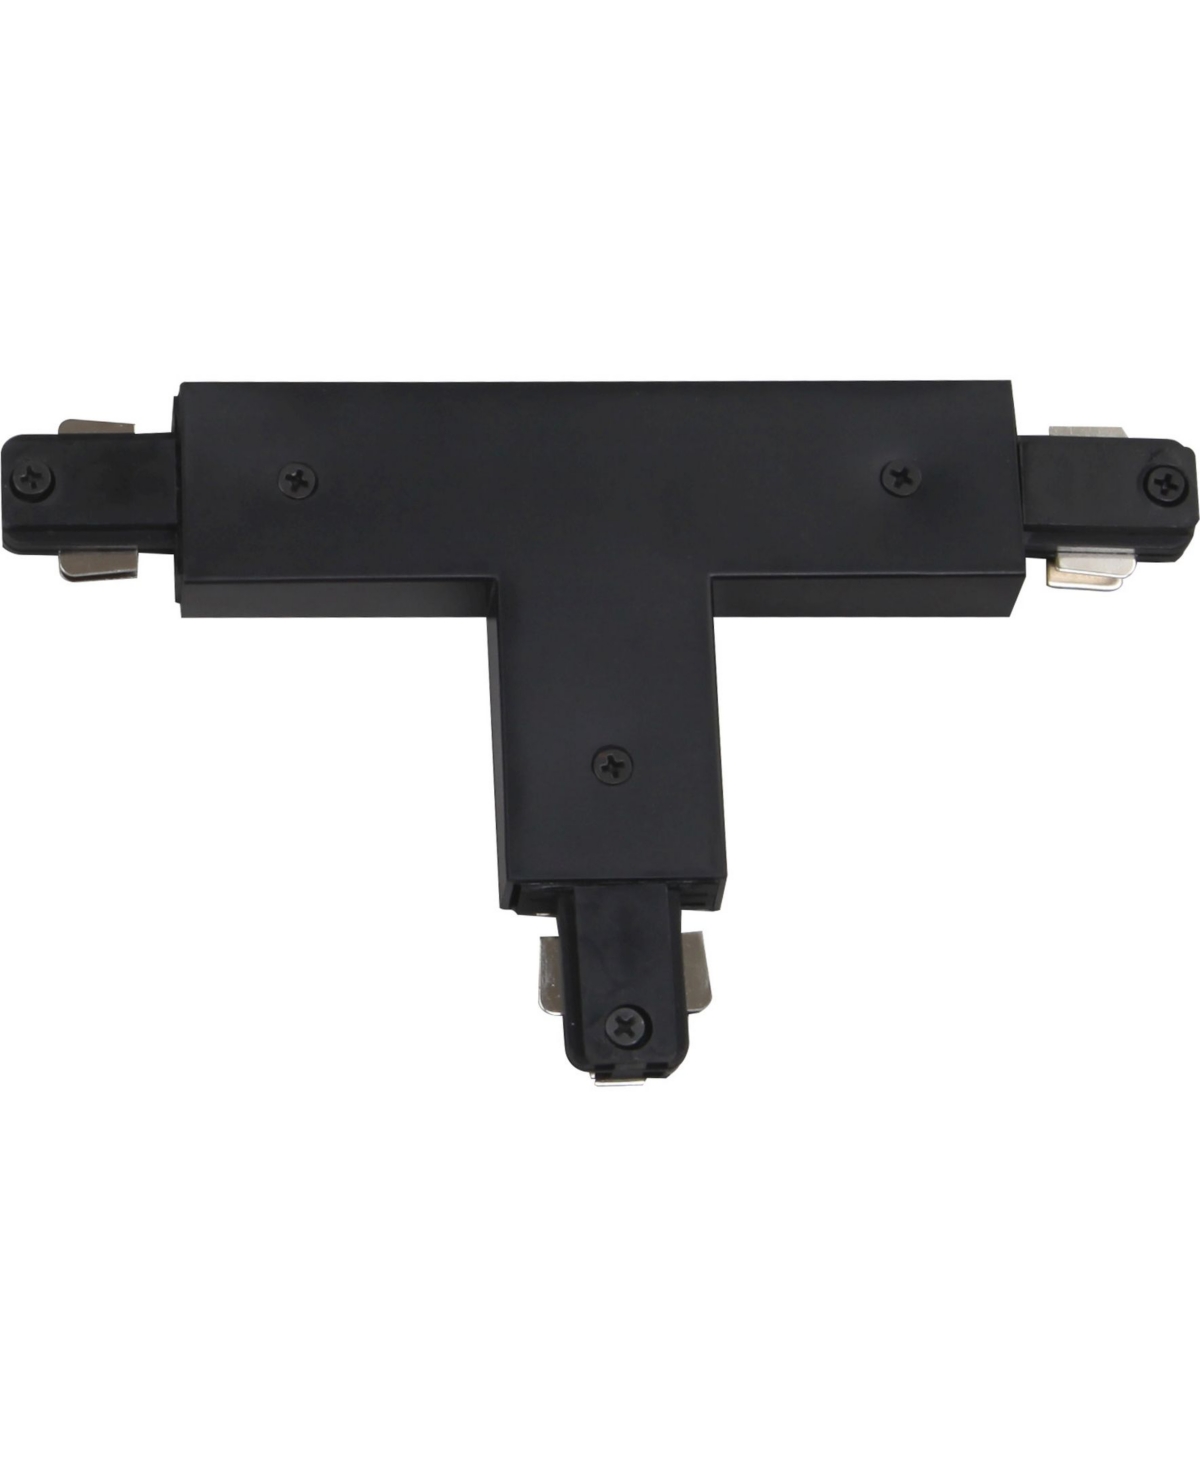 Volume Lighting "t" Connector 120v 2-circuit/1-neutral Track Systems In Black